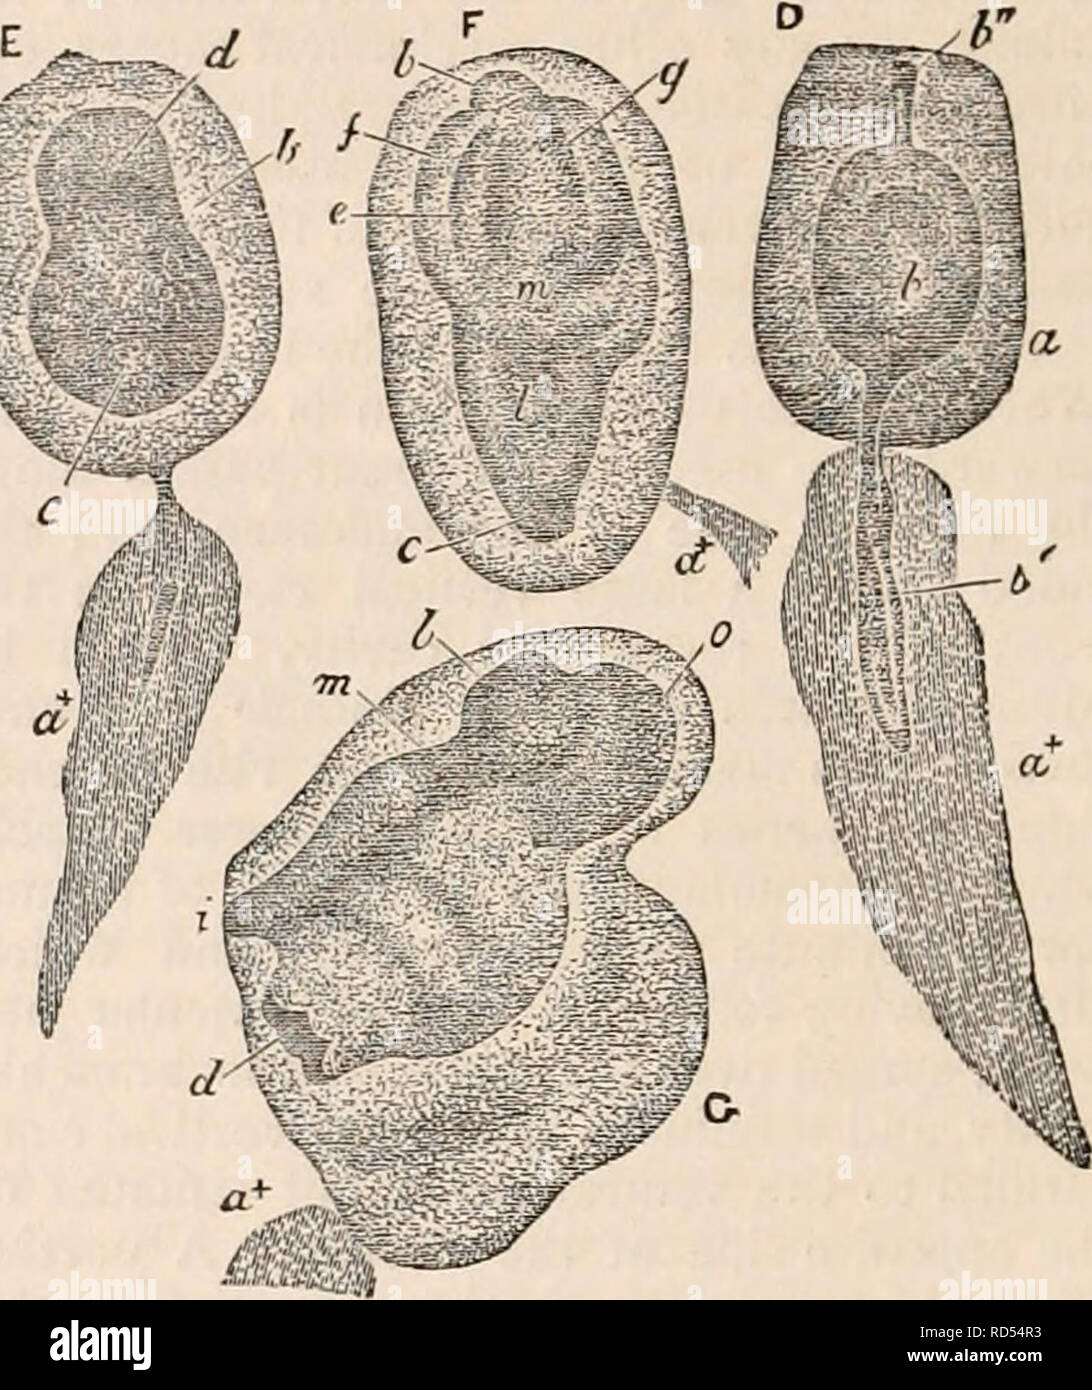 . The cyclopædia of anatomy and physiology. Anatomy; Physiology; Zoology. 77(e Development of the Larva of Amaroucium proliferum. (After Milne-Edwards.) A. An ovum the inclination of which is far advanced, magnified about 30 times. The tail, (6') is becoming distinct from the trunk (i) ; and two lobules begin to appear on the anterior extremity of the latter (l&gt;n). B. An ovum arrived at the full term of incubation, magnified about 30 times, a, the tegumentaiy portion ; b1, caudal portion ; b&quot;, b111, anterior appendages. c. Larval ascidia lately born, magnified about 25 times, a, tegume Stock Photo